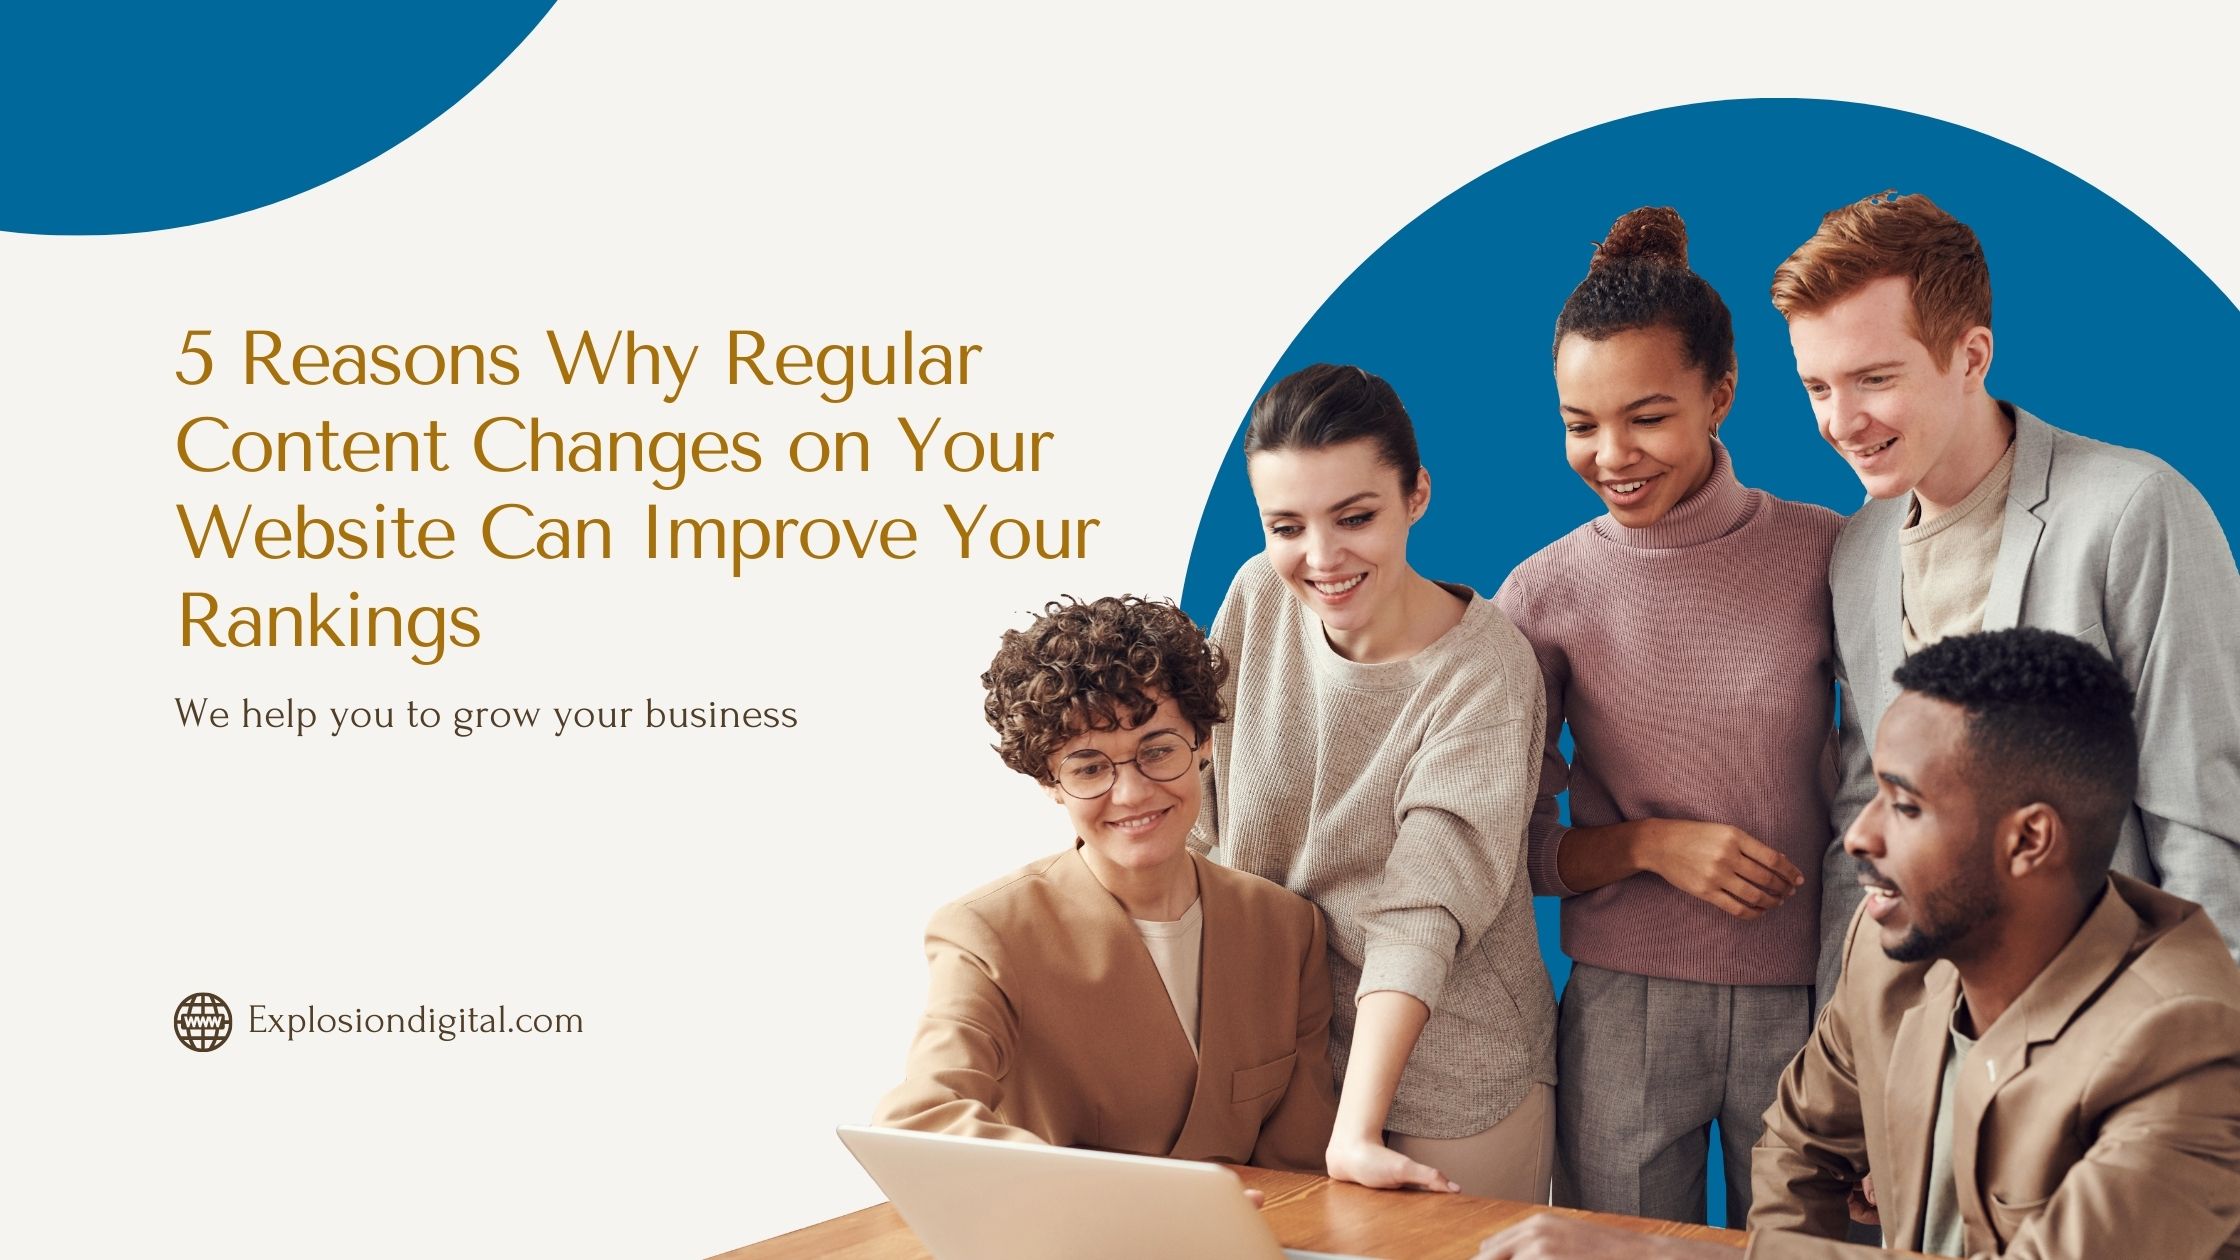 5 Reasons Content Changes on Your Website Can Improve Your Rankings